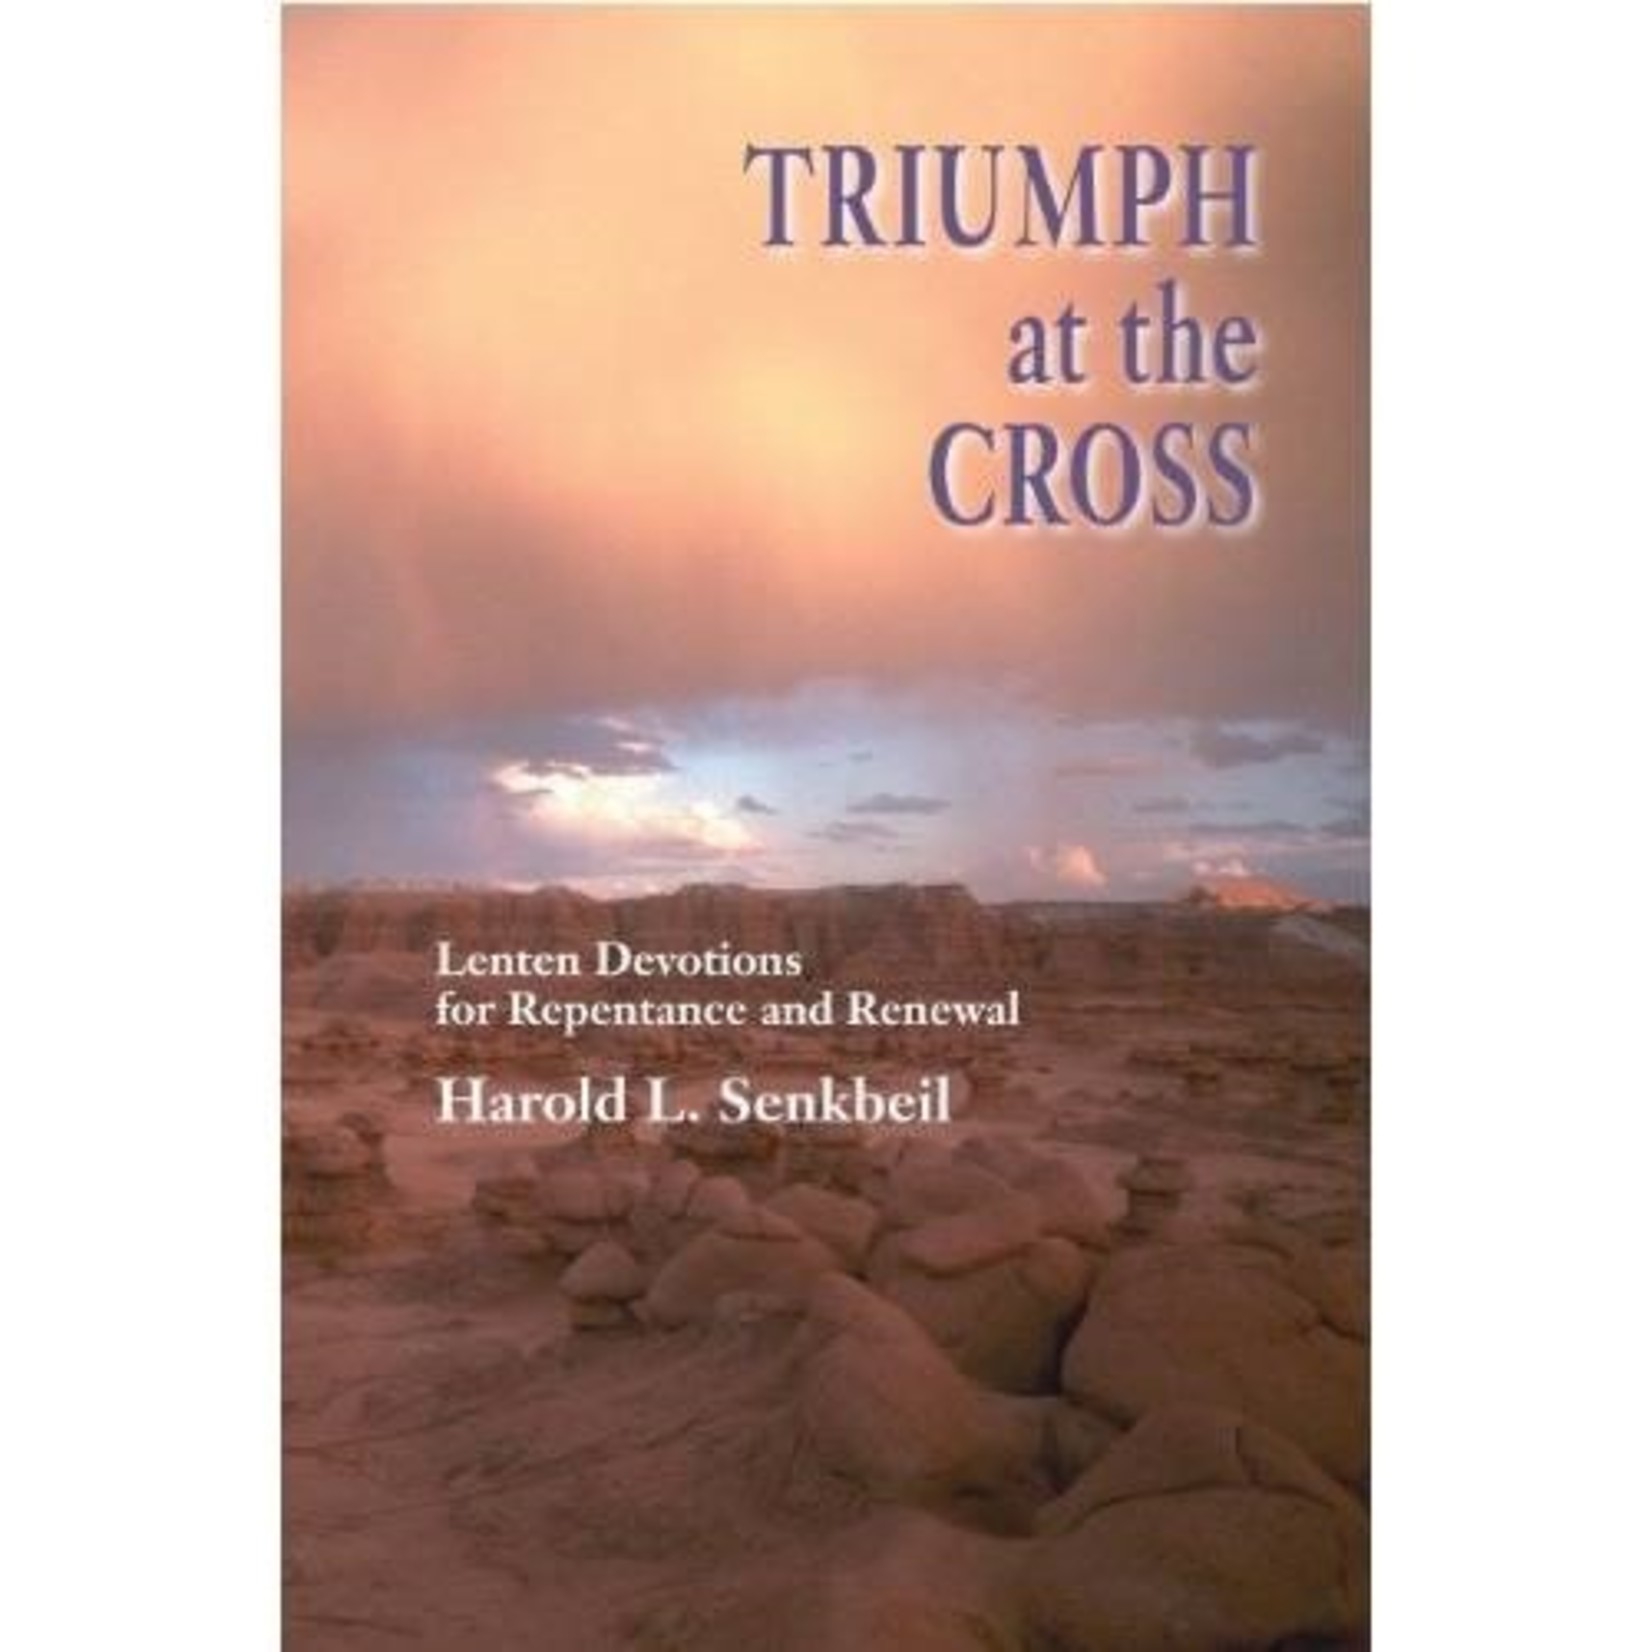 Triumph at the Cross - Lenten Devotions for Repentance and Renewal